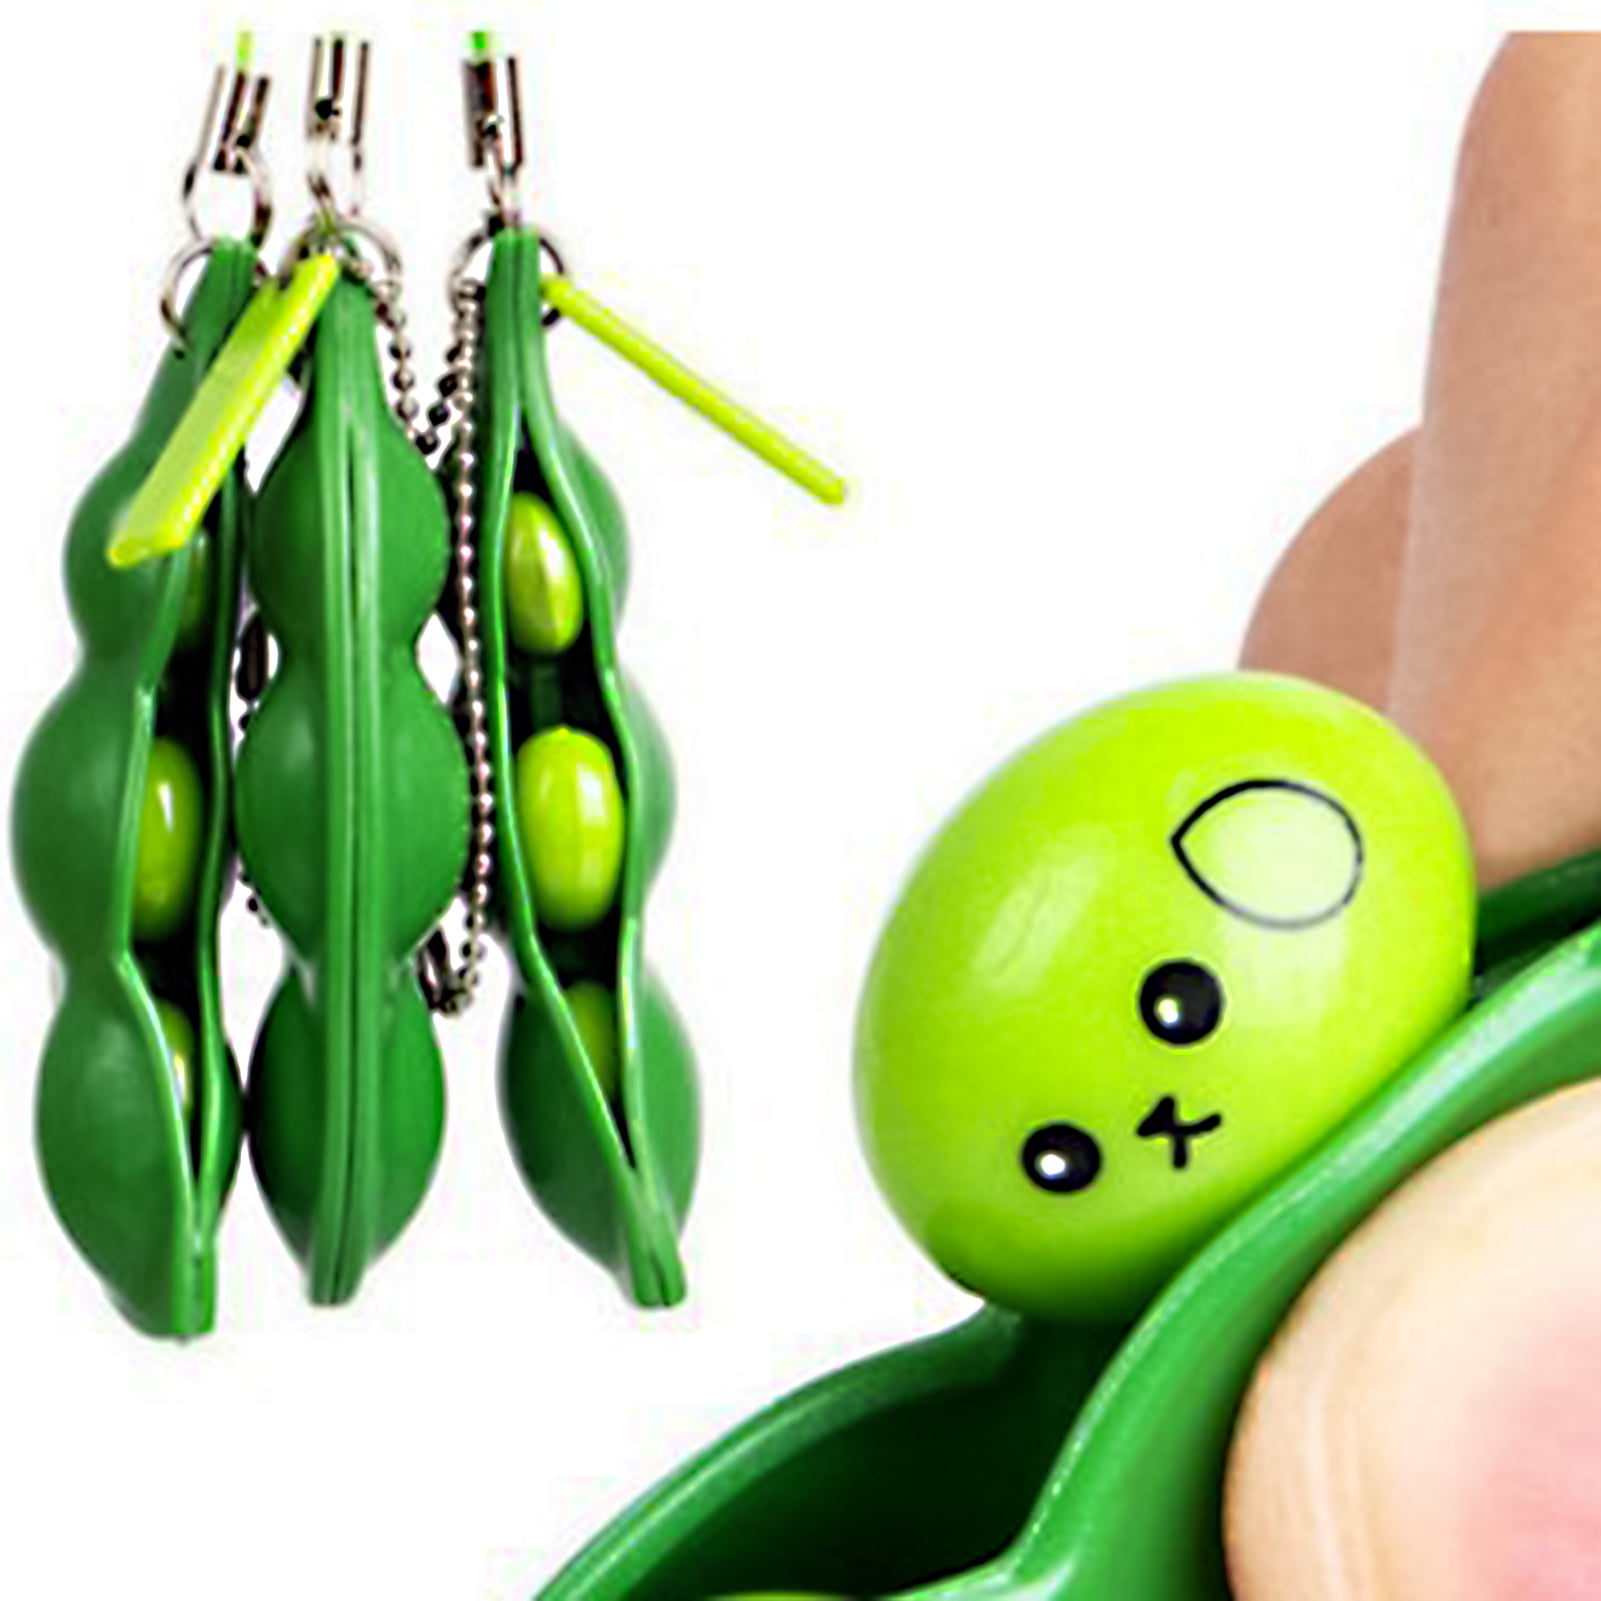 Cute Funny Beans Squeeze Toys Adult Anti-Stress Relief Anxiety Keychain#^ 